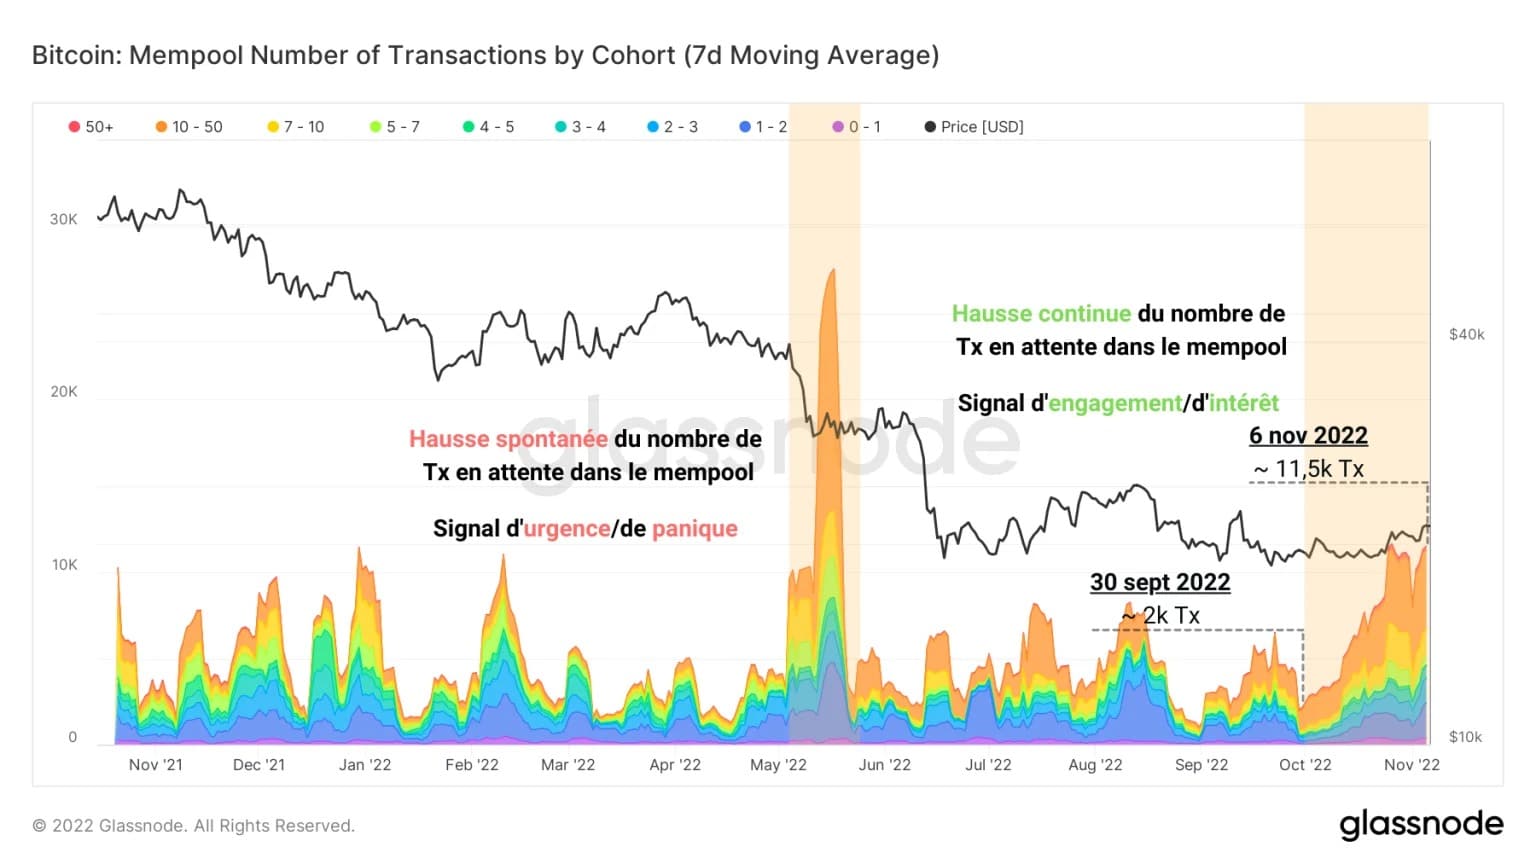 Figure 4: Number of transactions in the mempool